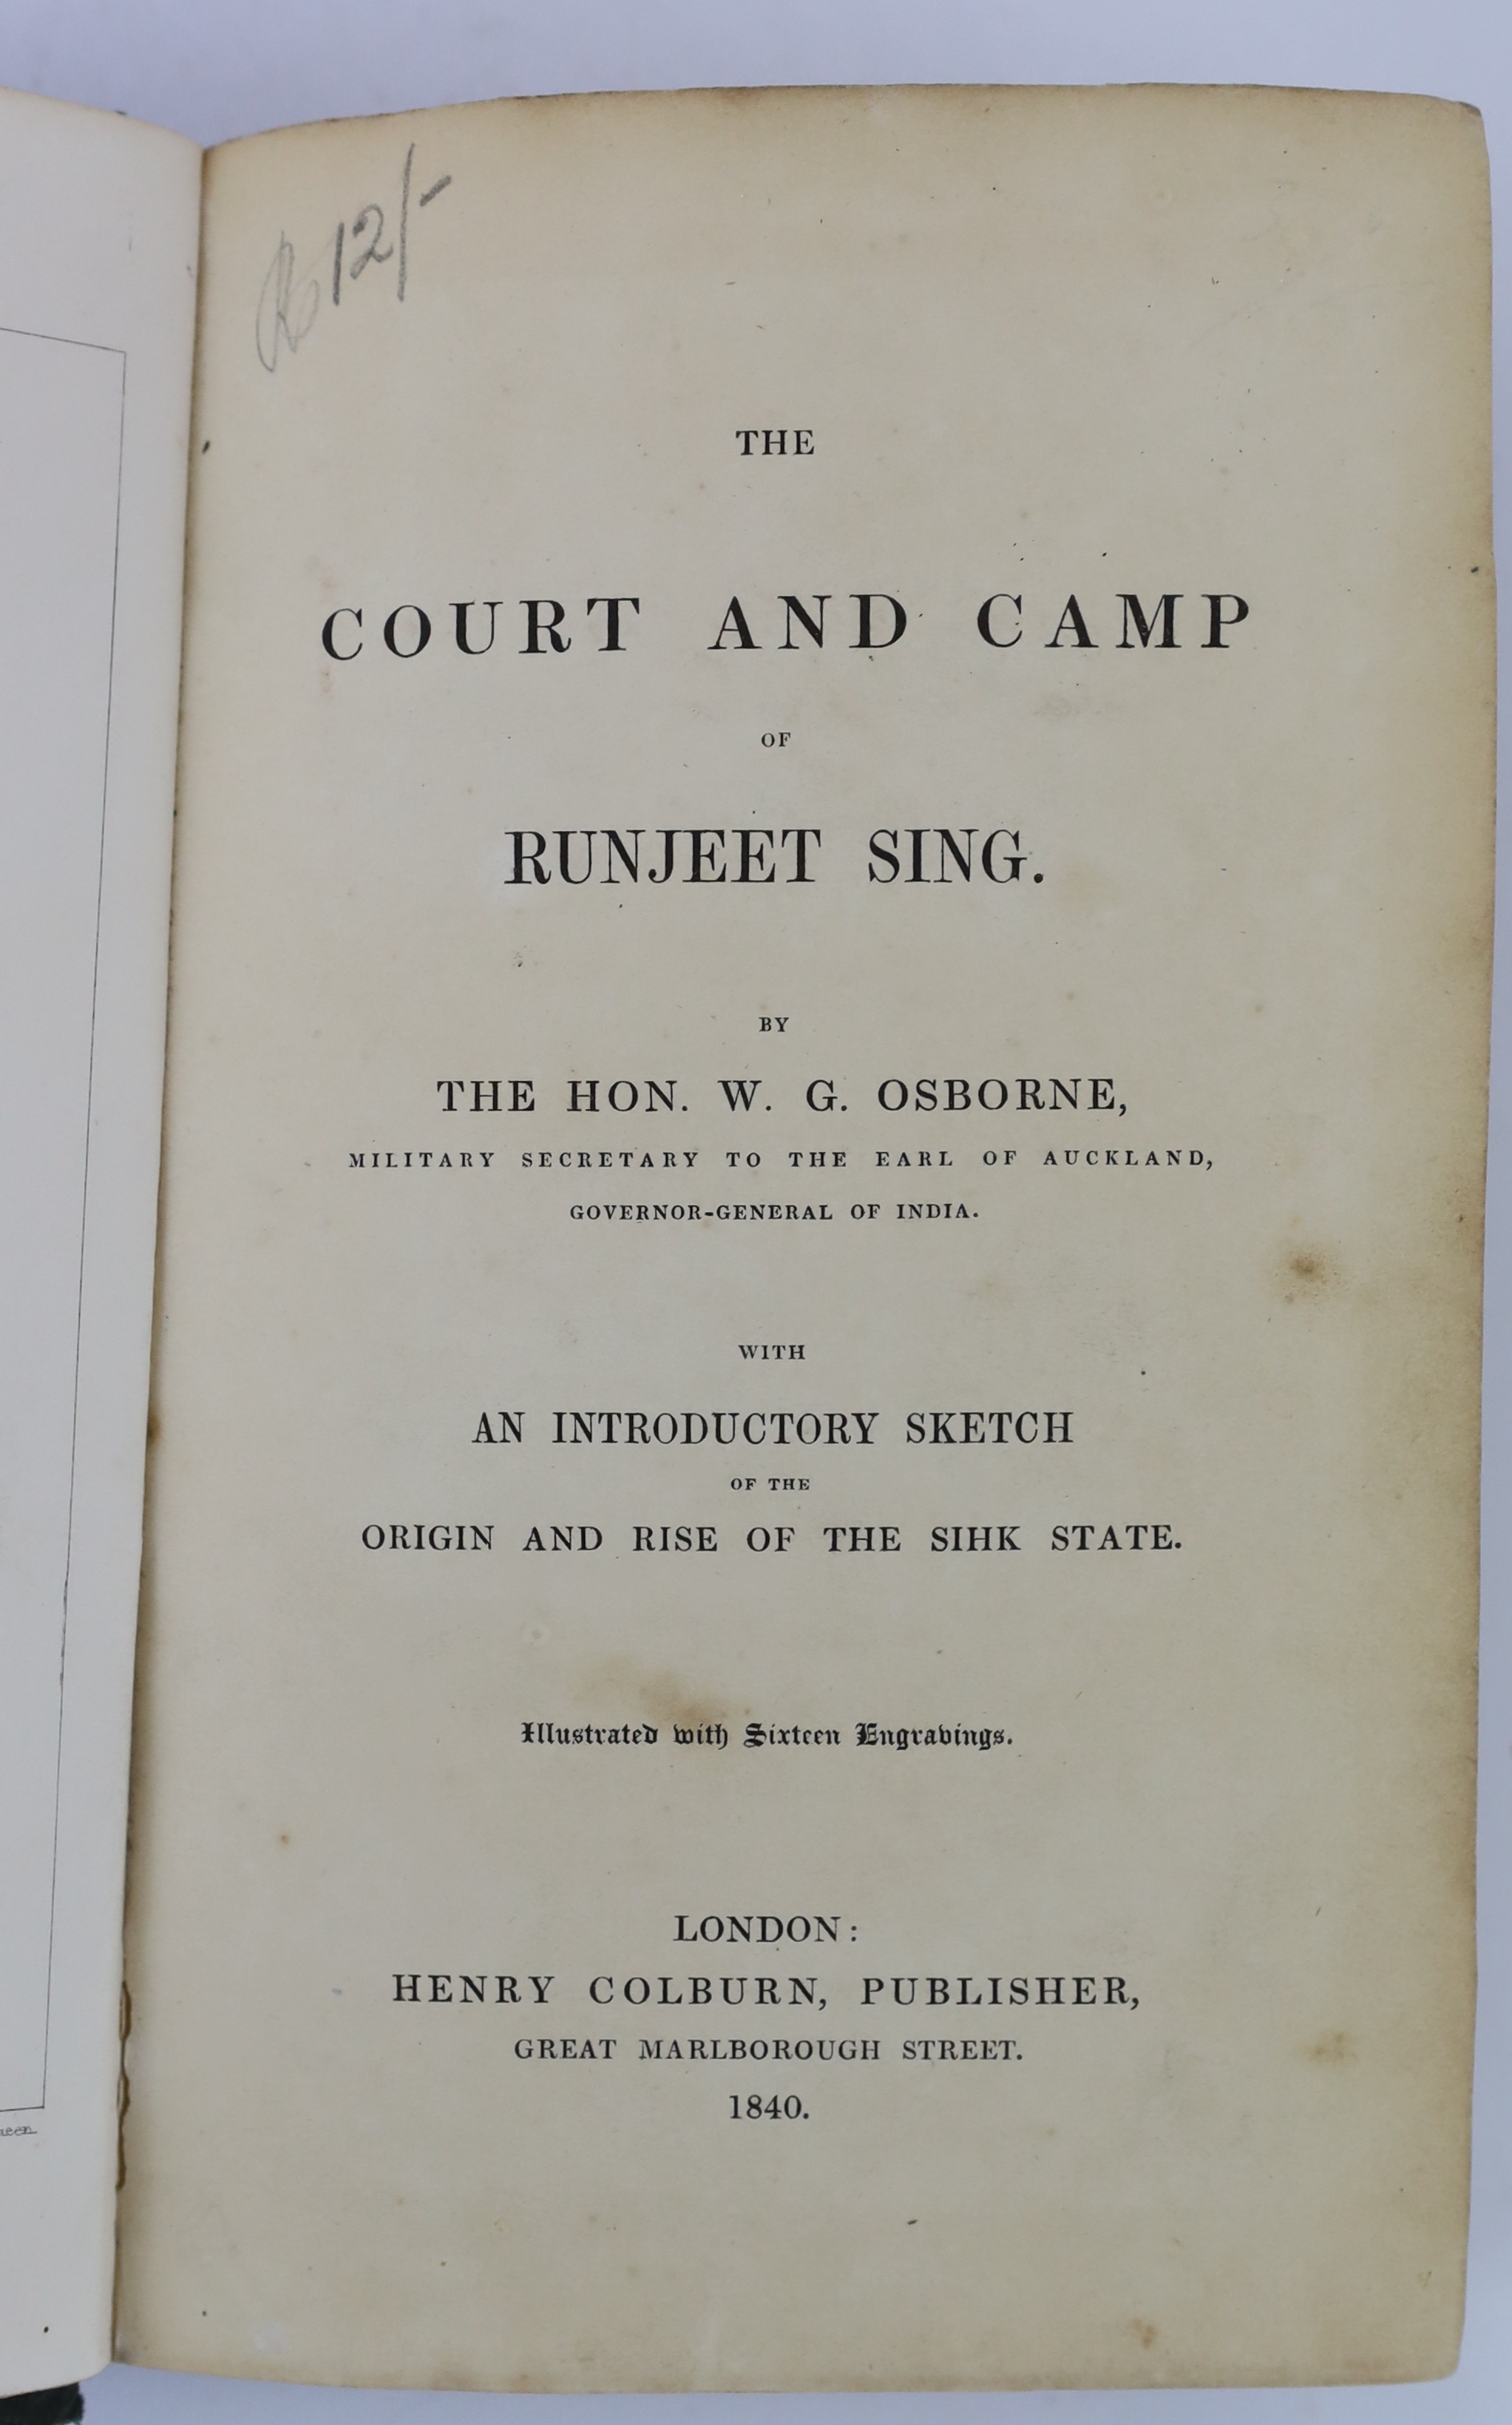 Osborne, William Godolphin, Lord - The Court and Camp of Runjeet Sing. With an introductory sketch of the origin and rise of the Sihk state